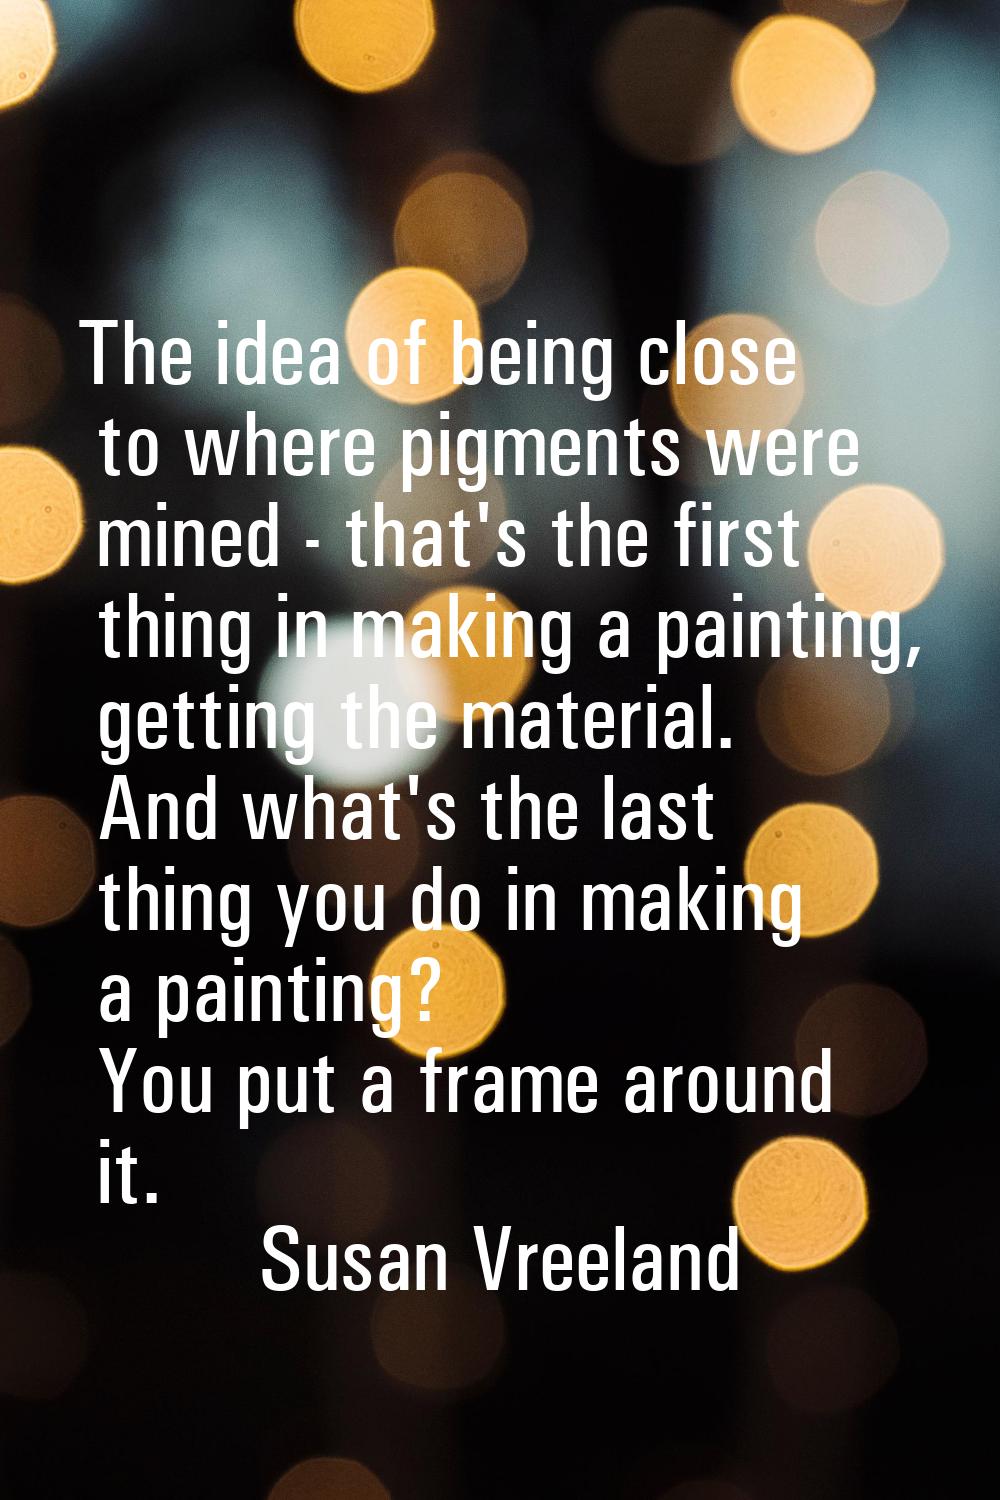 The idea of being close to where pigments were mined - that's the first thing in making a painting,